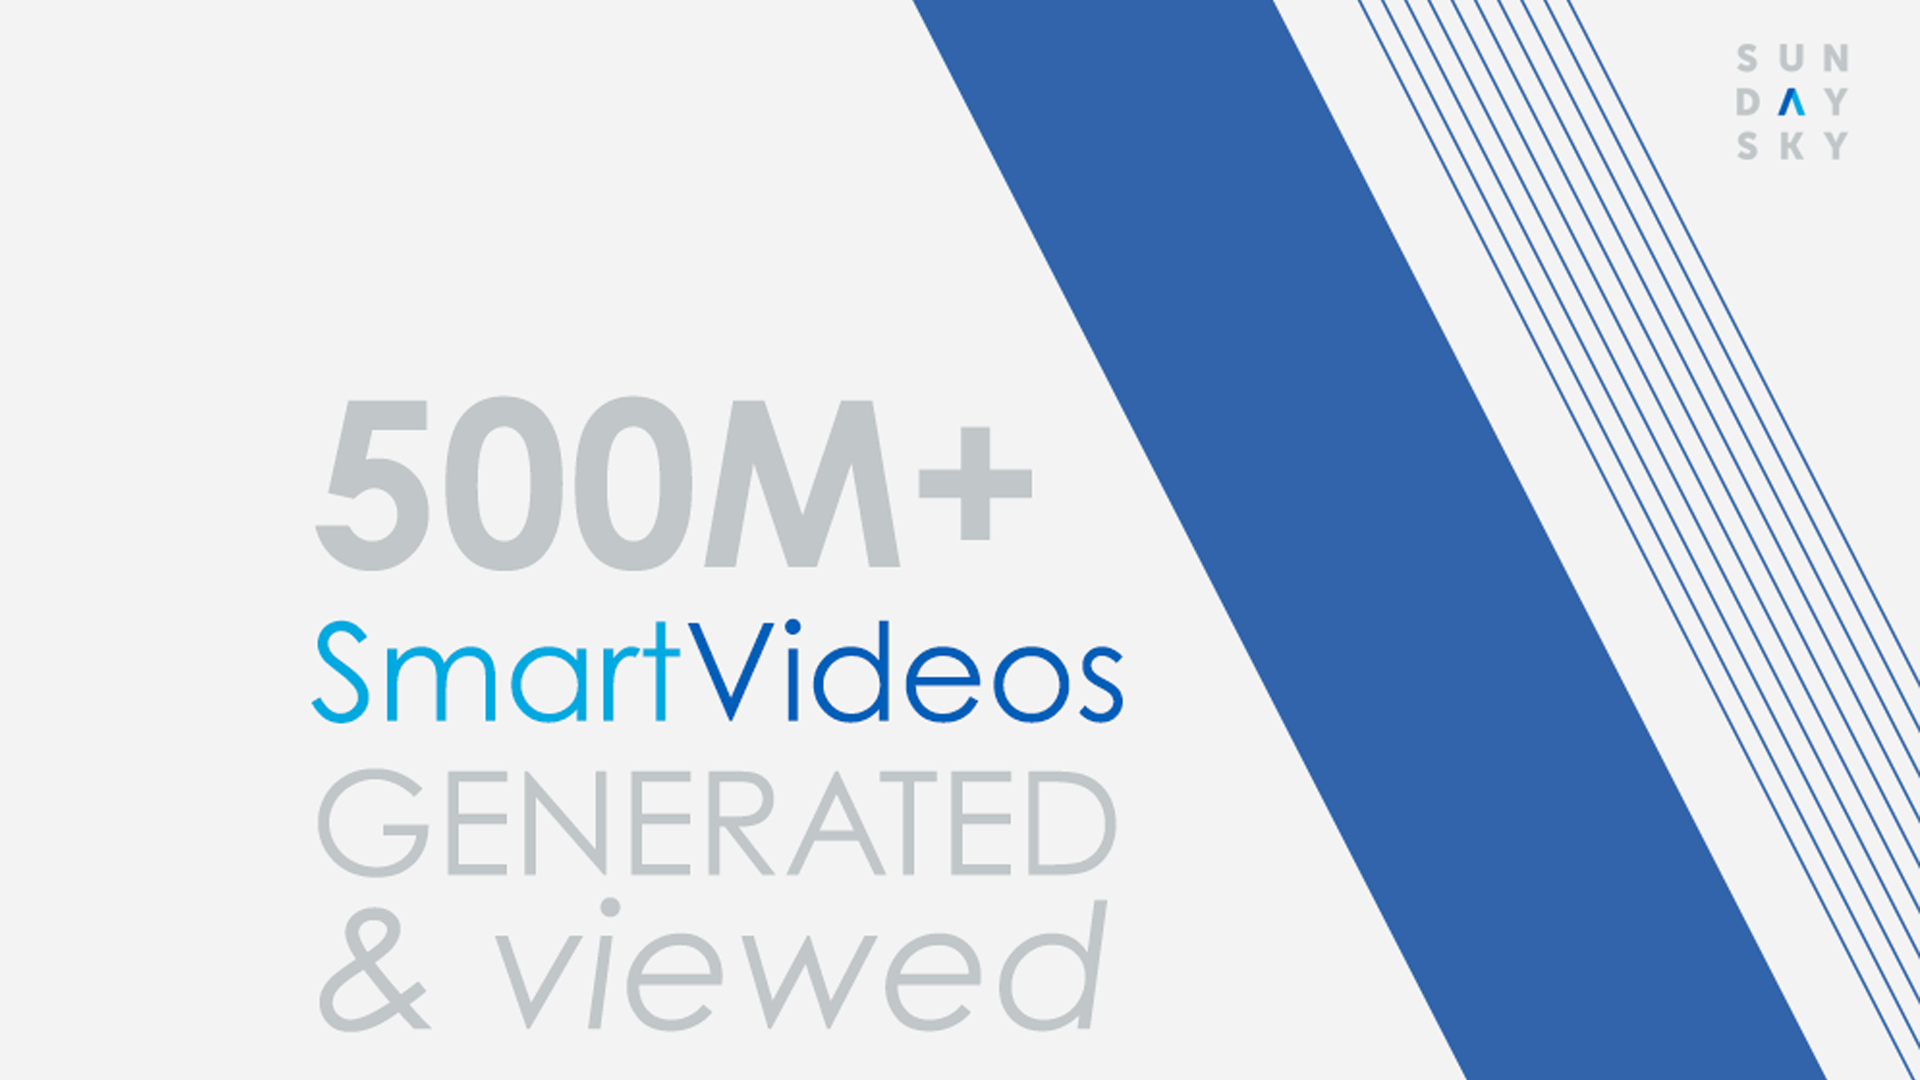 What Does 500M Views Mean for a Personalized Video Engagement Company?